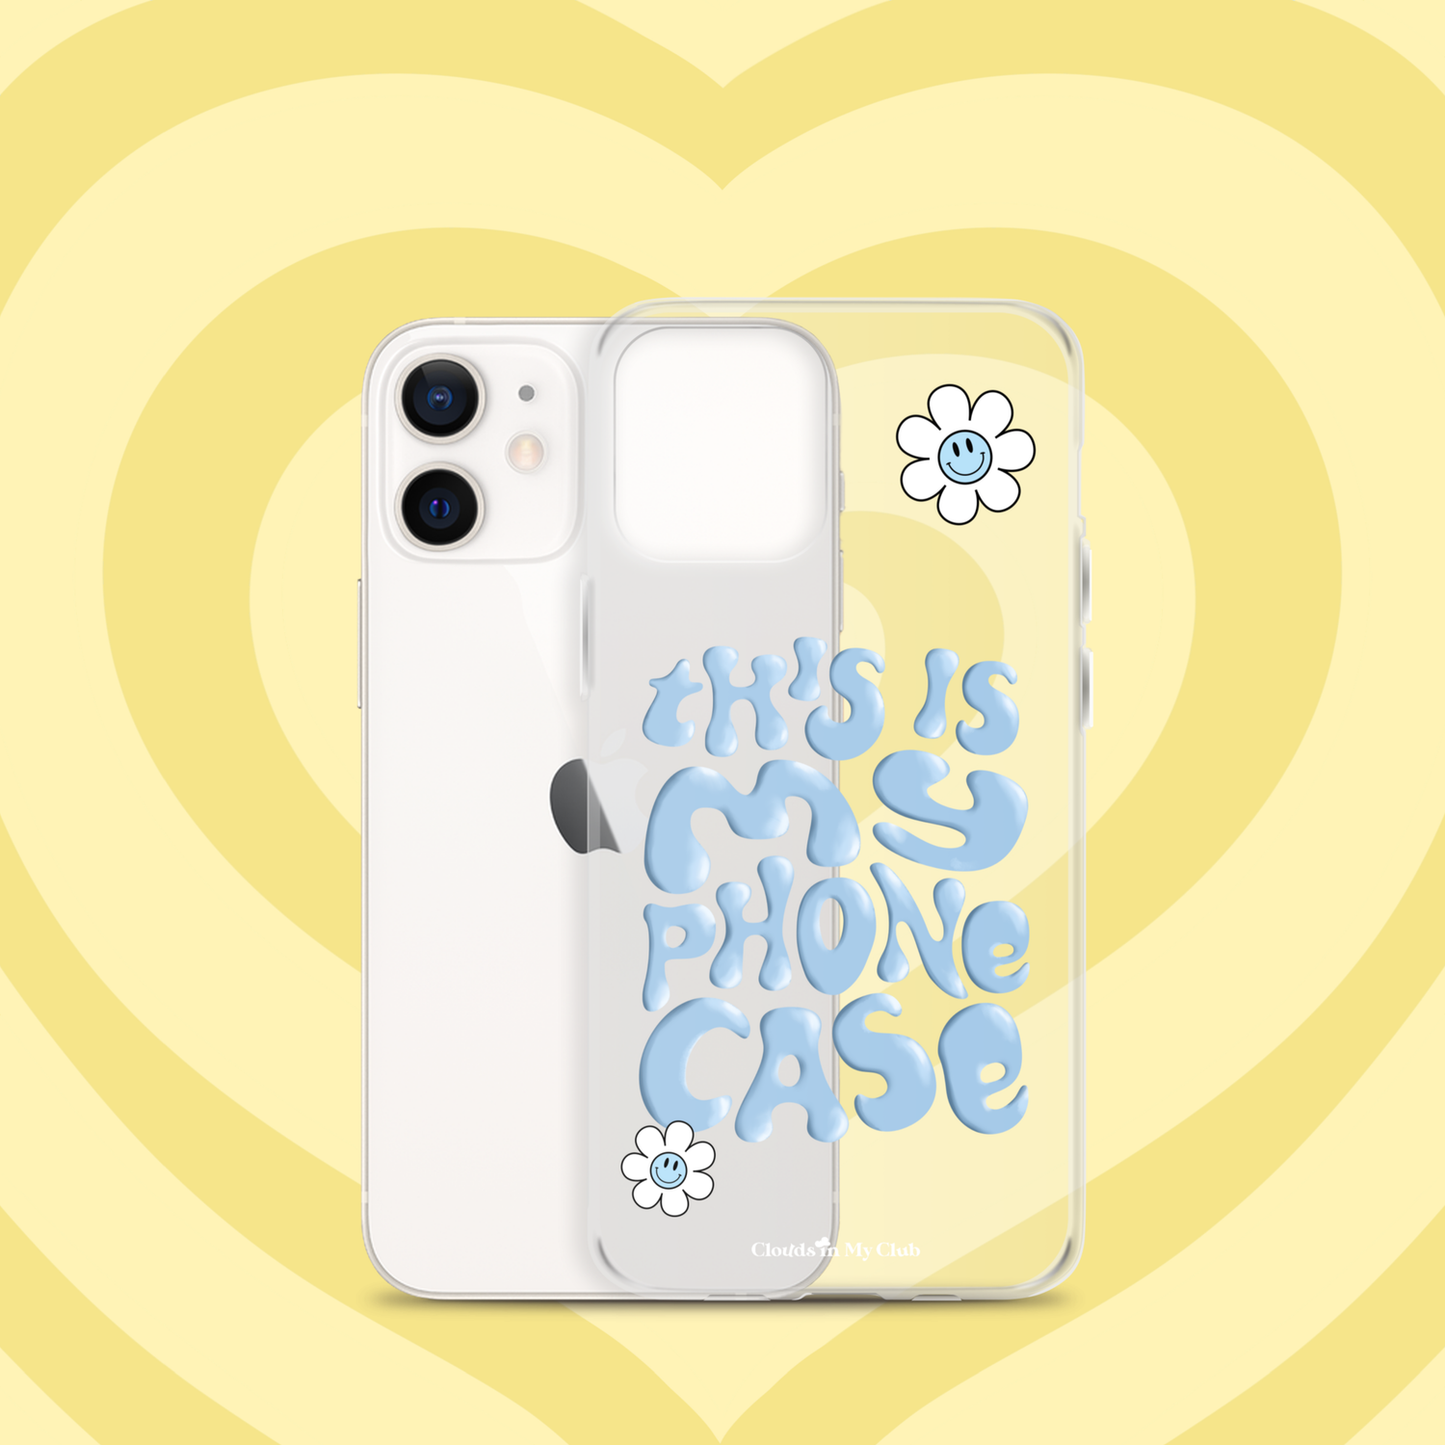 "This Is My Phone Case" iPhone Case (Sky)